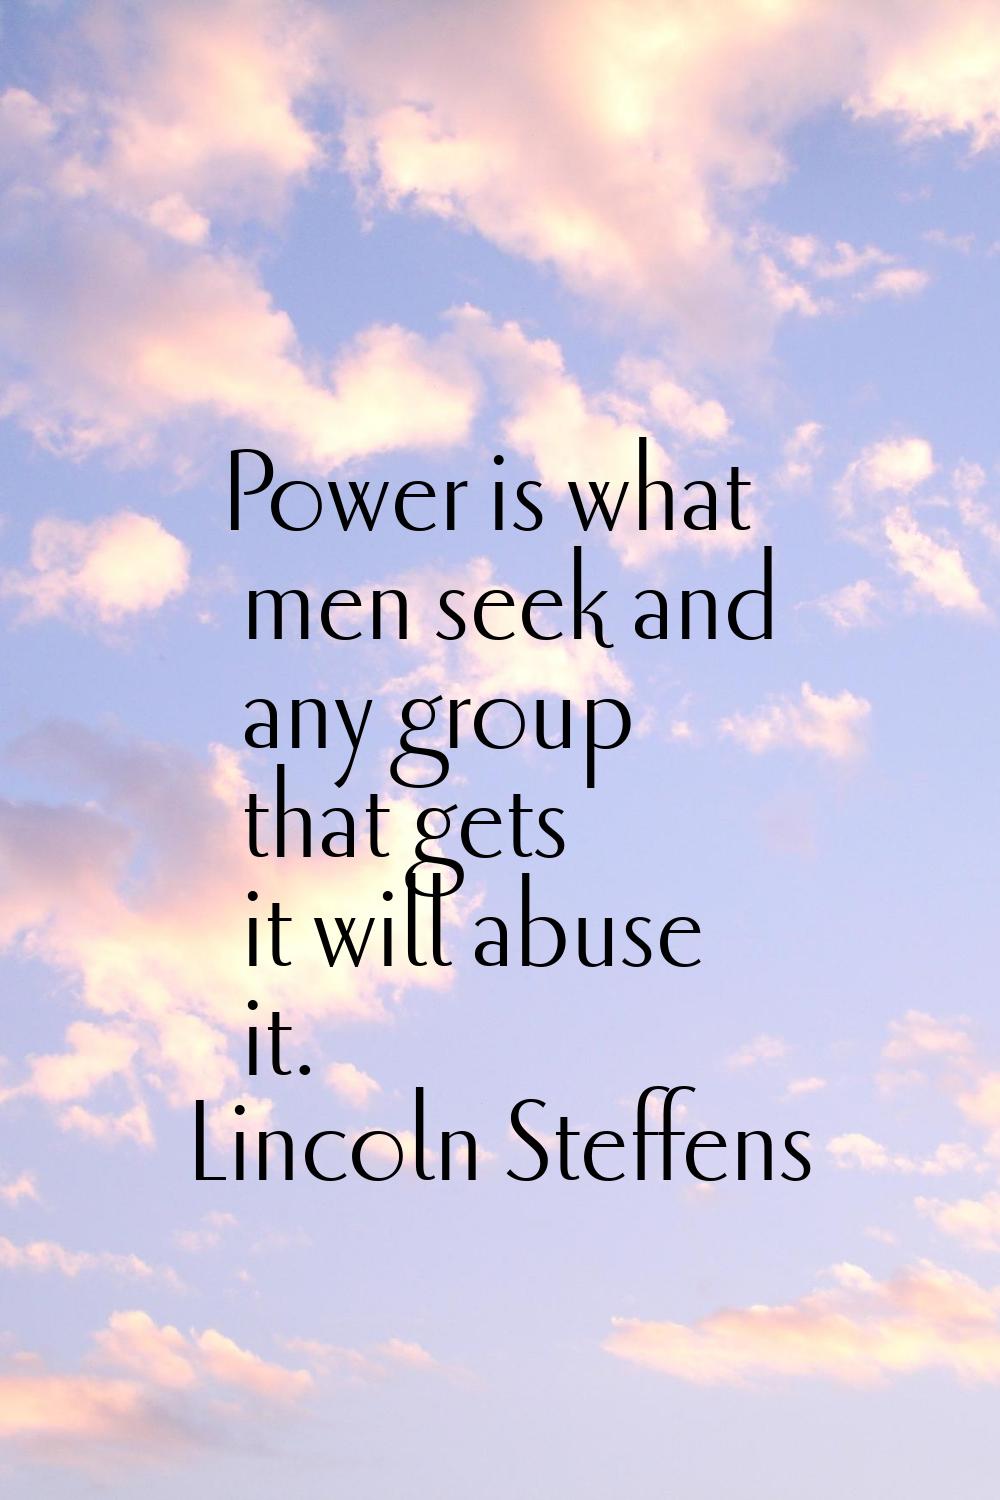 Power is what men seek and any group that gets it will abuse it.